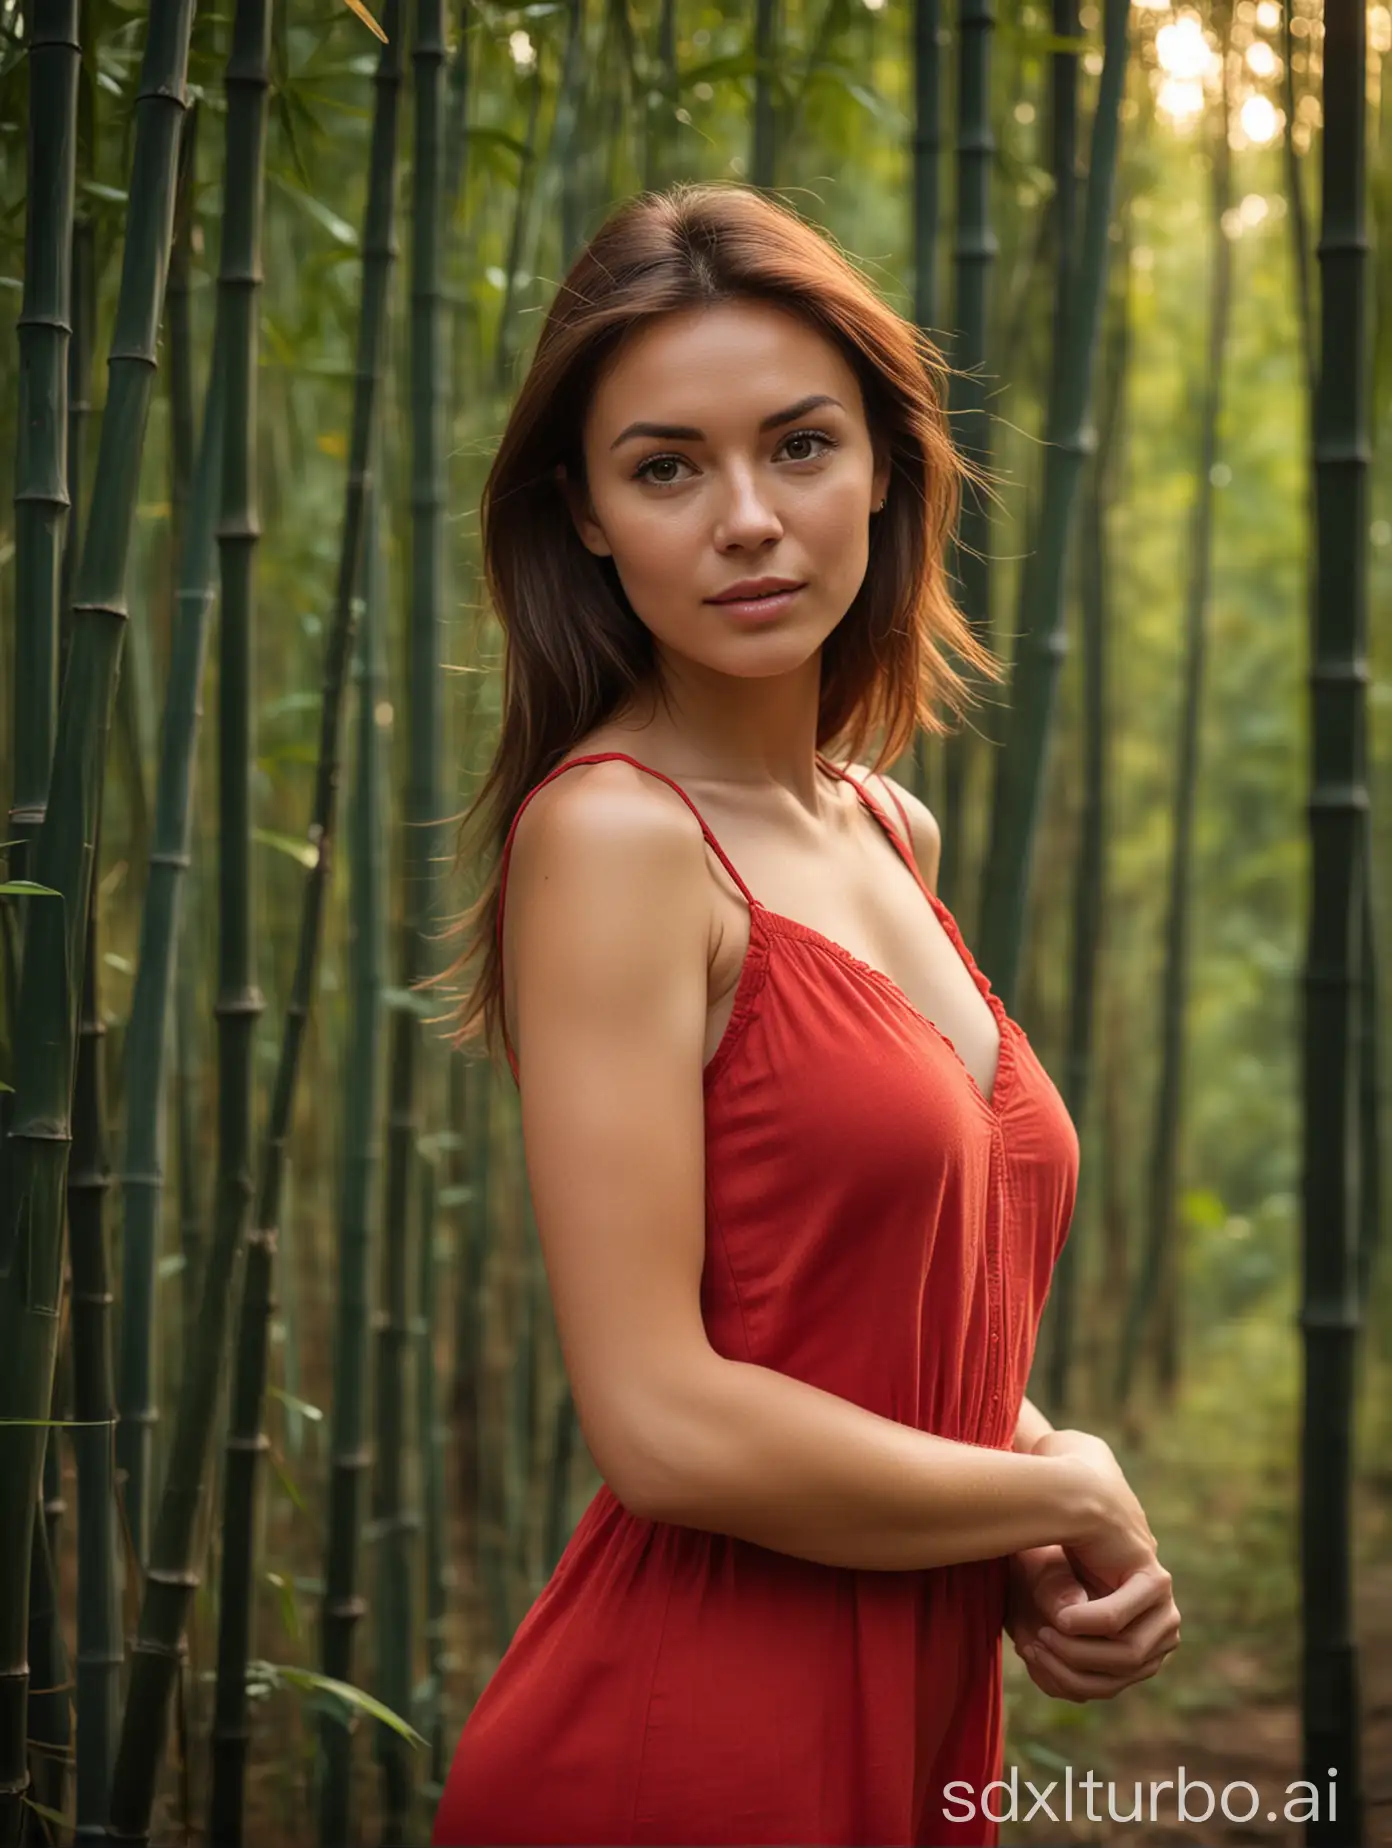 woman, medium brown hair, slim body, small breast, wearing plain red sleeveless sundress, close up, background is dark thick bamboo forest, evening, bokeh